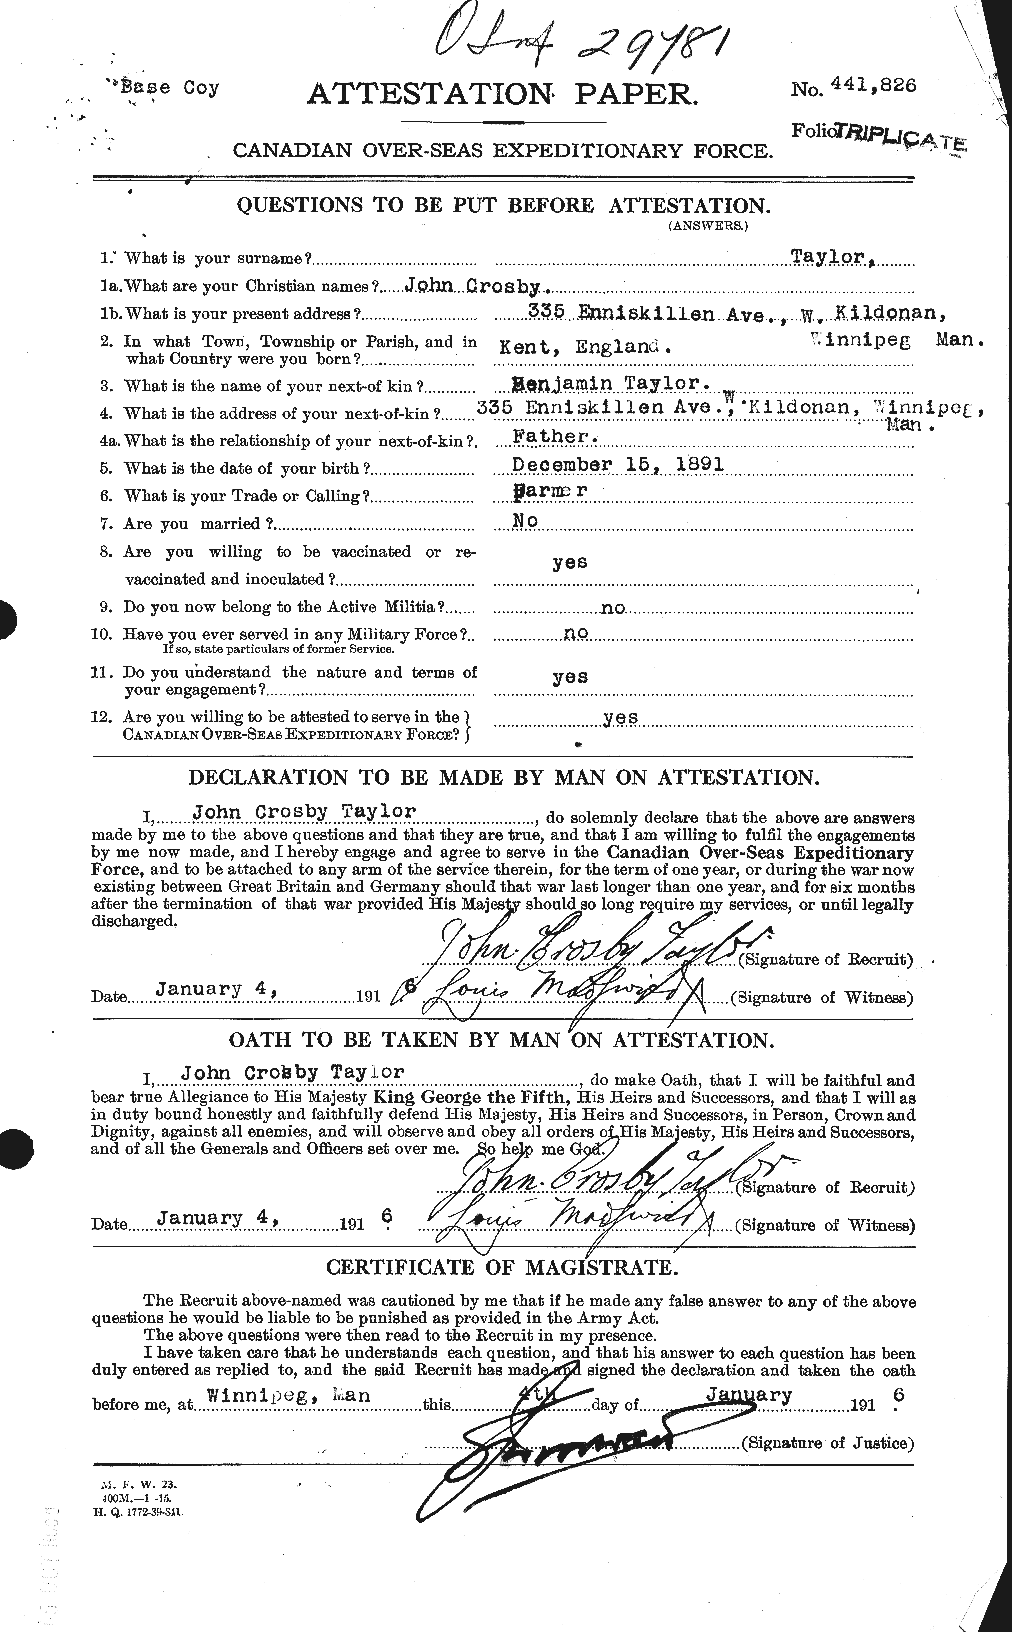 Personnel Records of the First World War - CEF 627063a